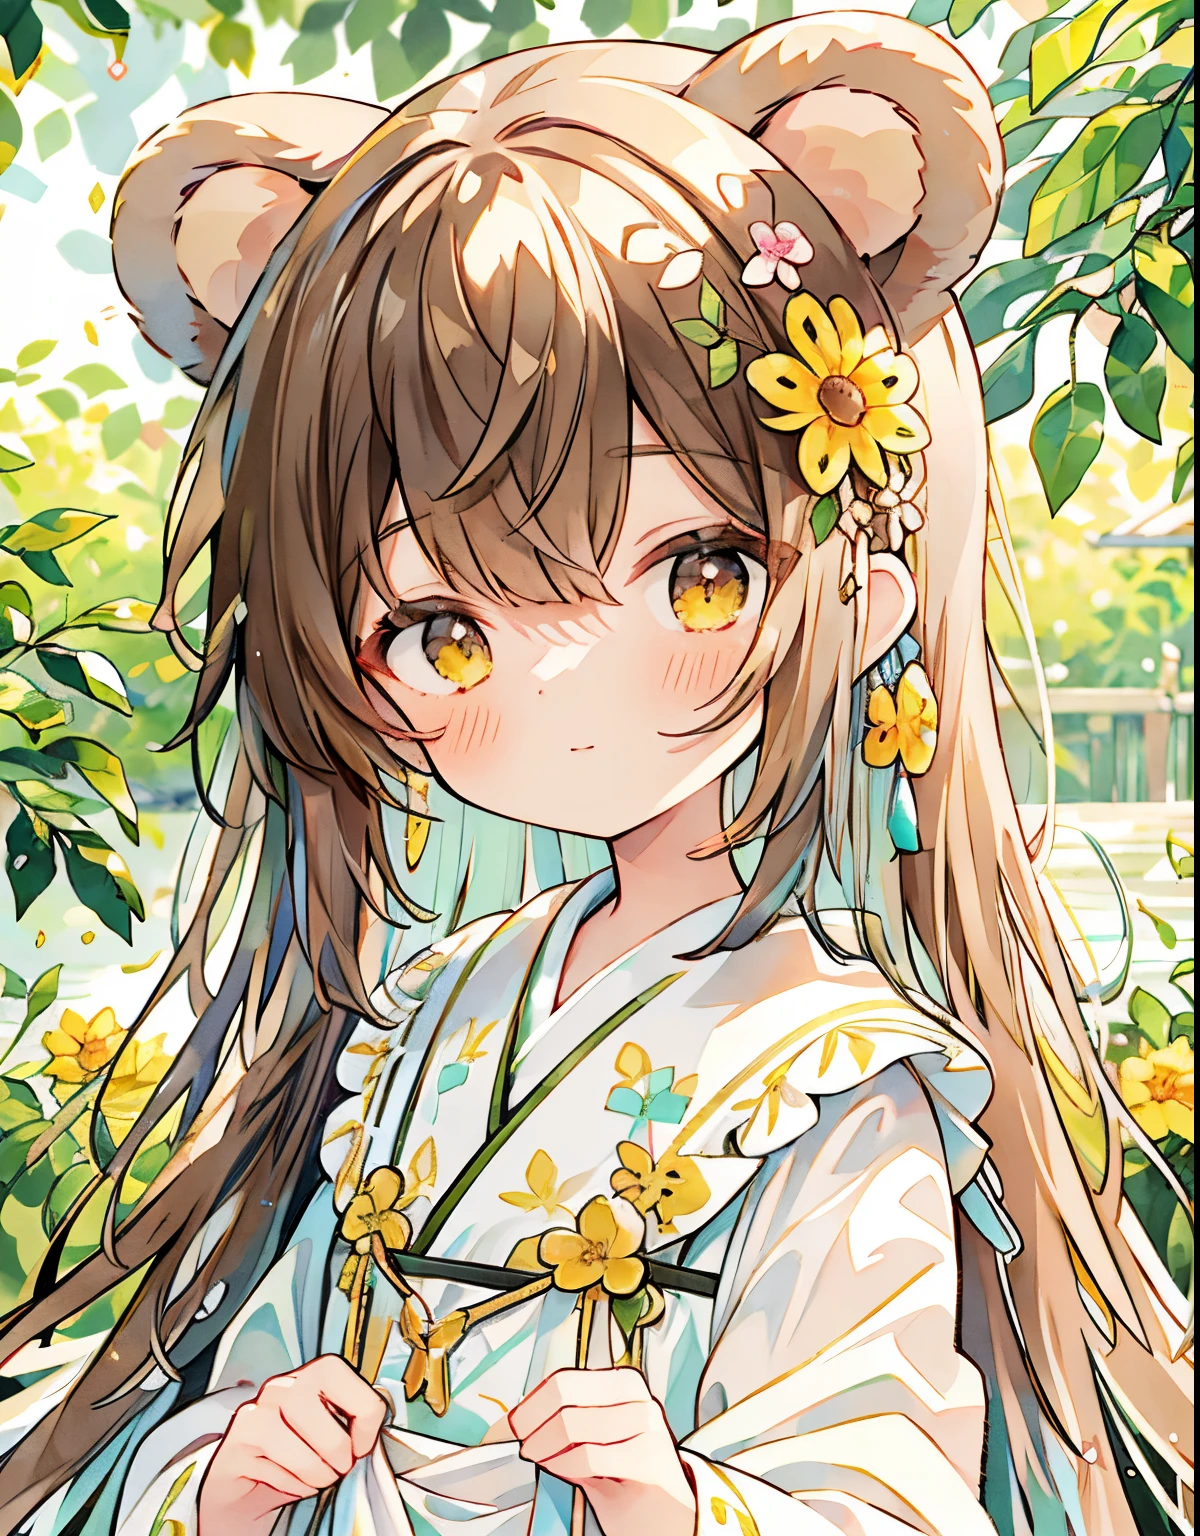 1girl in, Elegant floral dress, absurderes, hight resolution, (Anime style:1.1), ((masutepiece)), ((Best Quality)), (Ultra-detailed), (Beautiful),Beautiful face、(liftup),Cute  s、(((Bear ears)))((Stuffy look、))heart mark、honey、light brown hair、Yellow eyes、yellow flower、Background Simple、((The upper part of the body))、Long、 Intricate details, Soft and dreamy lighting, Pastel color palette, Shallow depth of field, The blur of sunlight shining through the leaves, Highly detailed, Hyper-realistic,